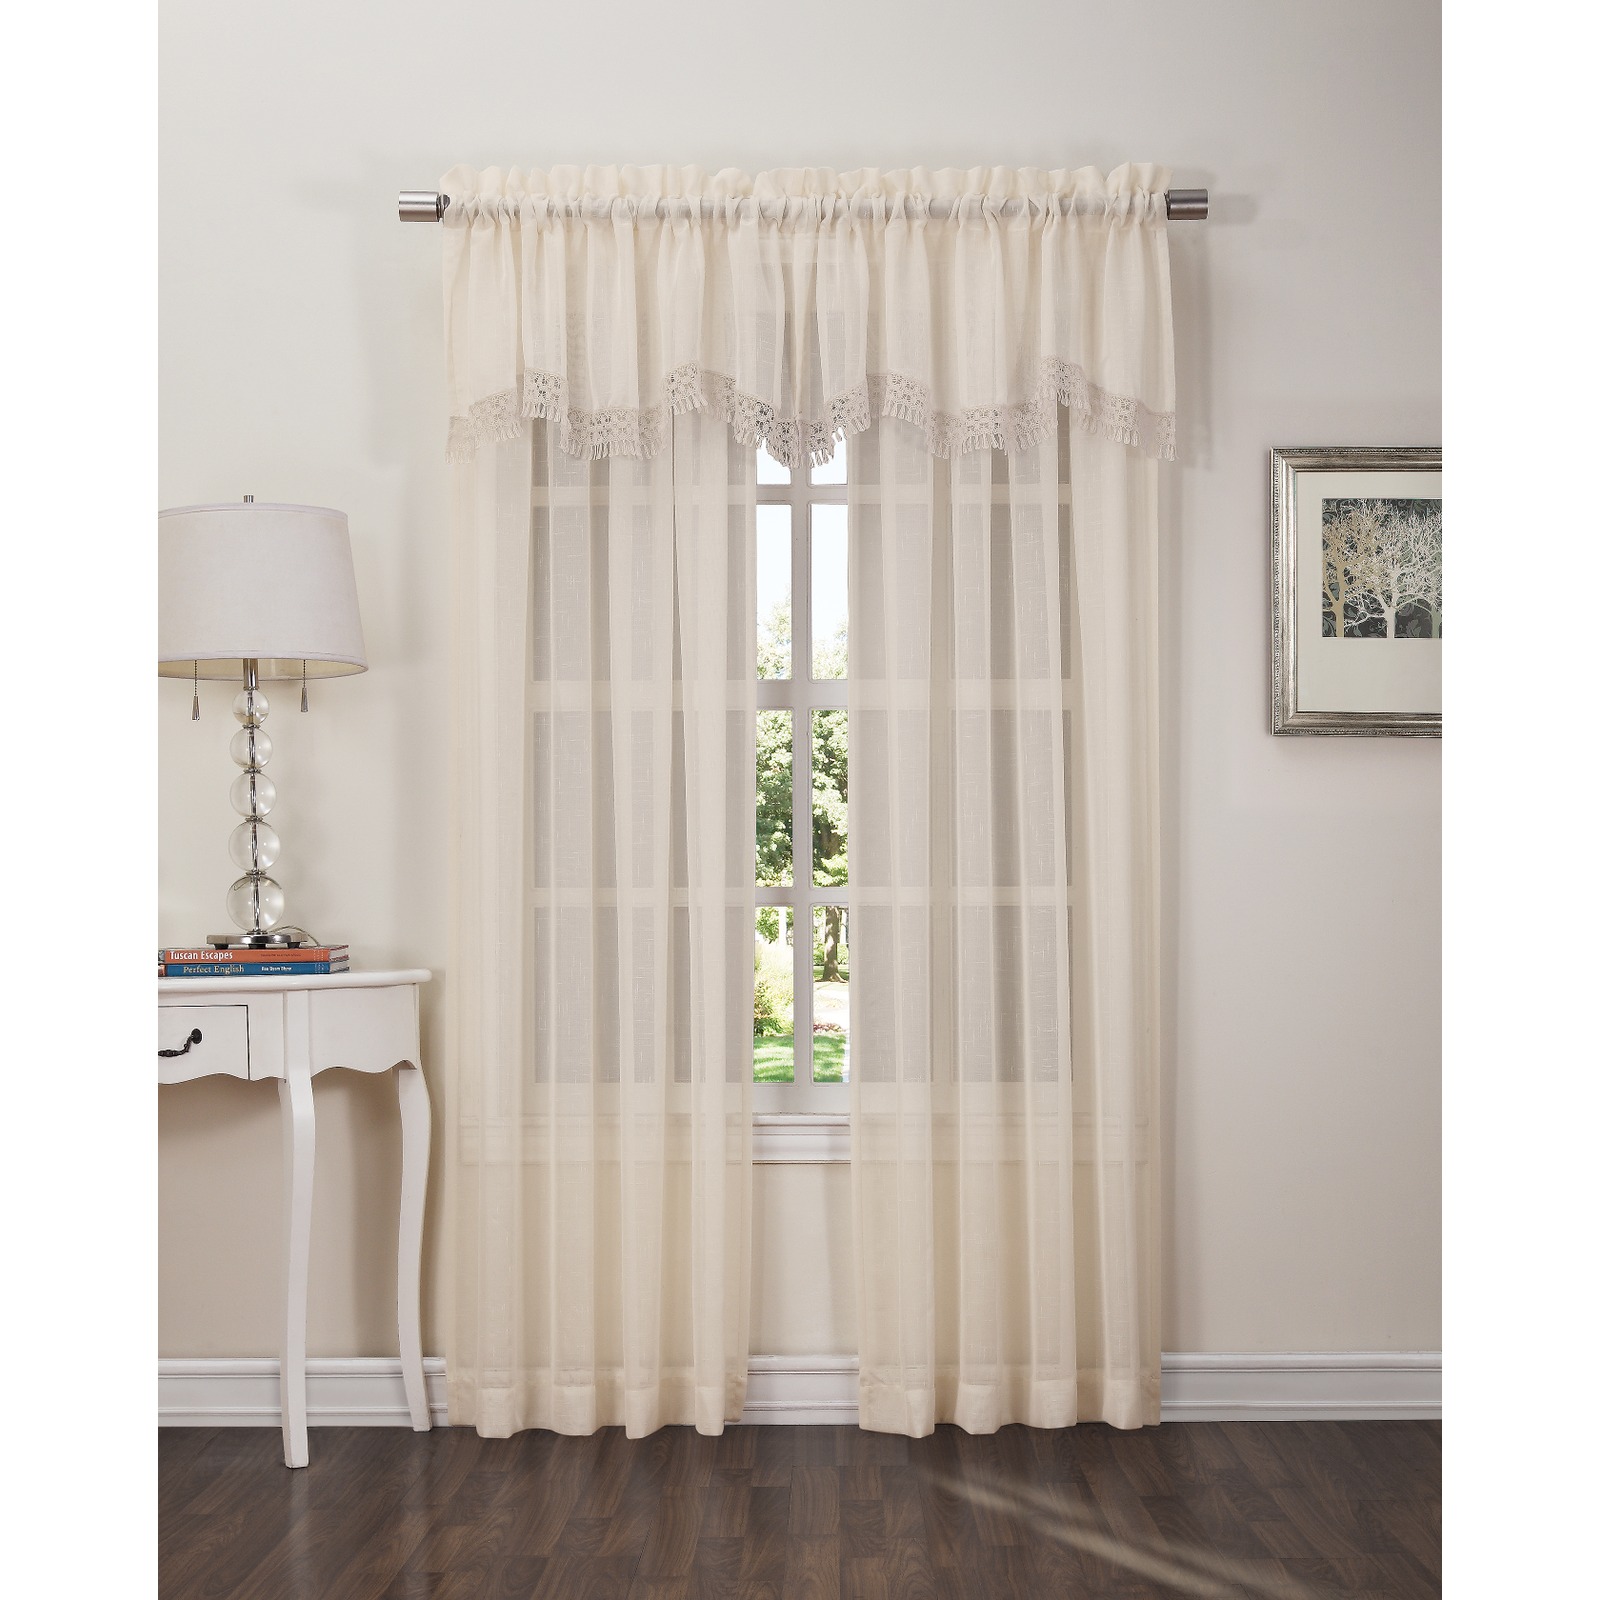 Parker 52in. x 18in. Valance